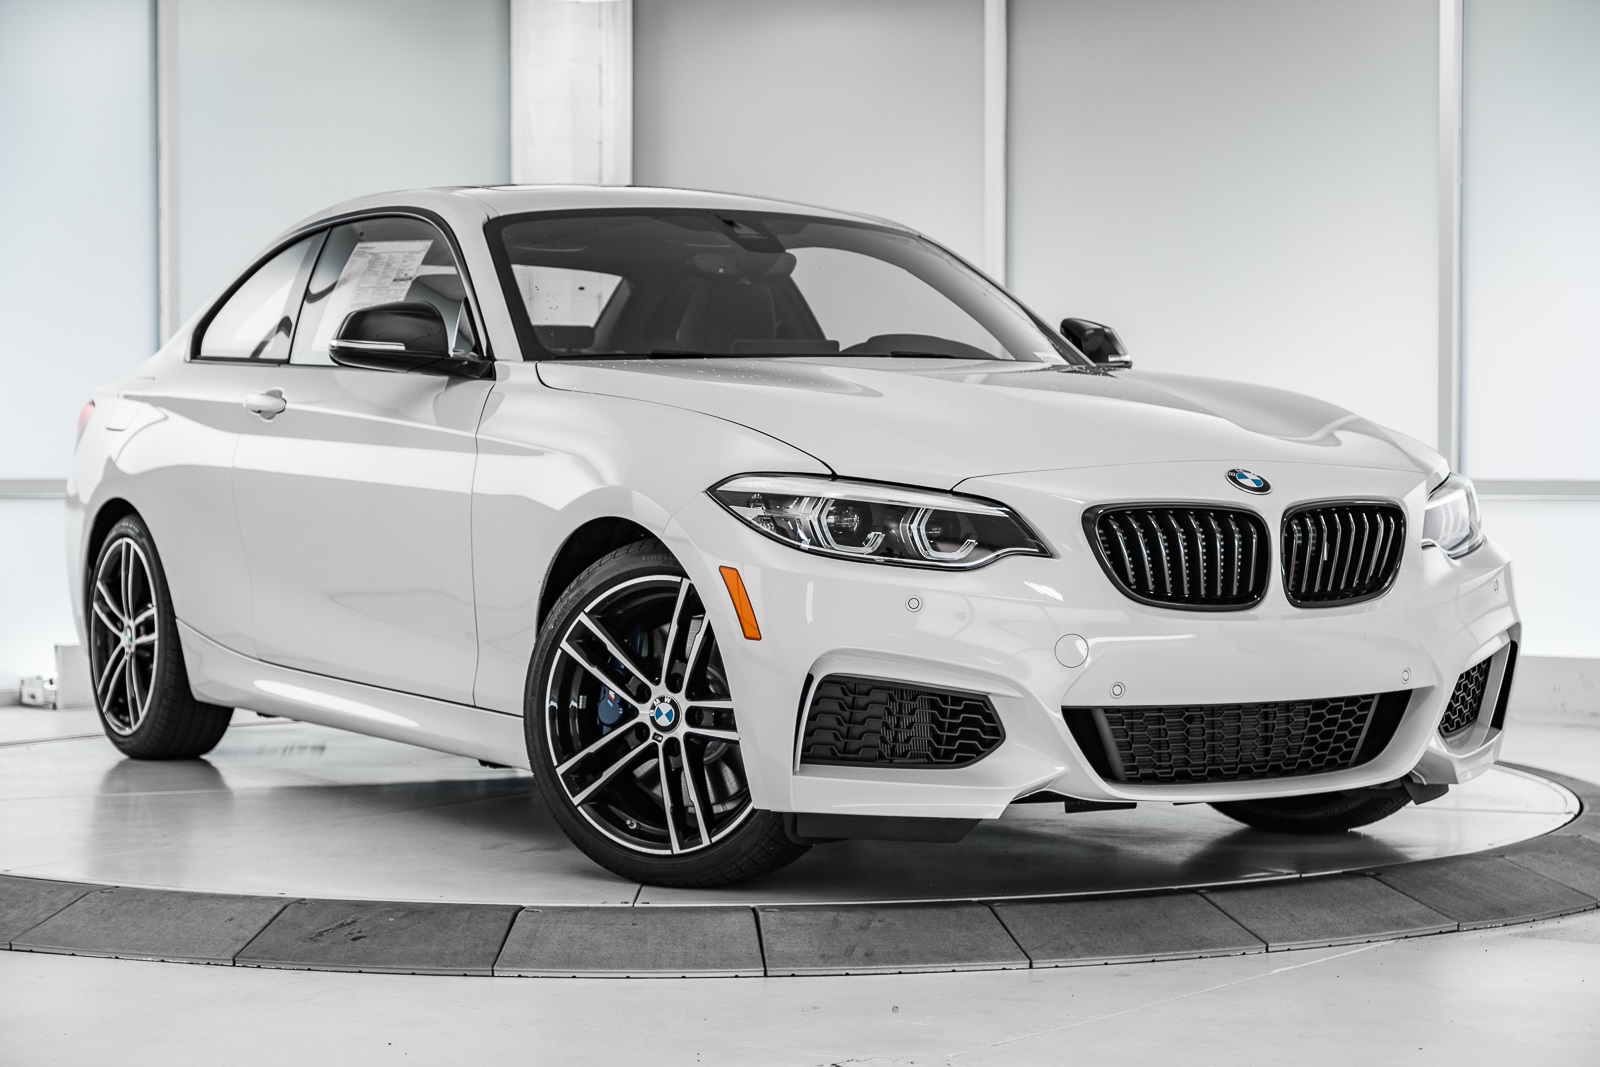 New 2020 Bmw 2 Series M240i 2d Coupe In Thousand Oaks 24200089 1069